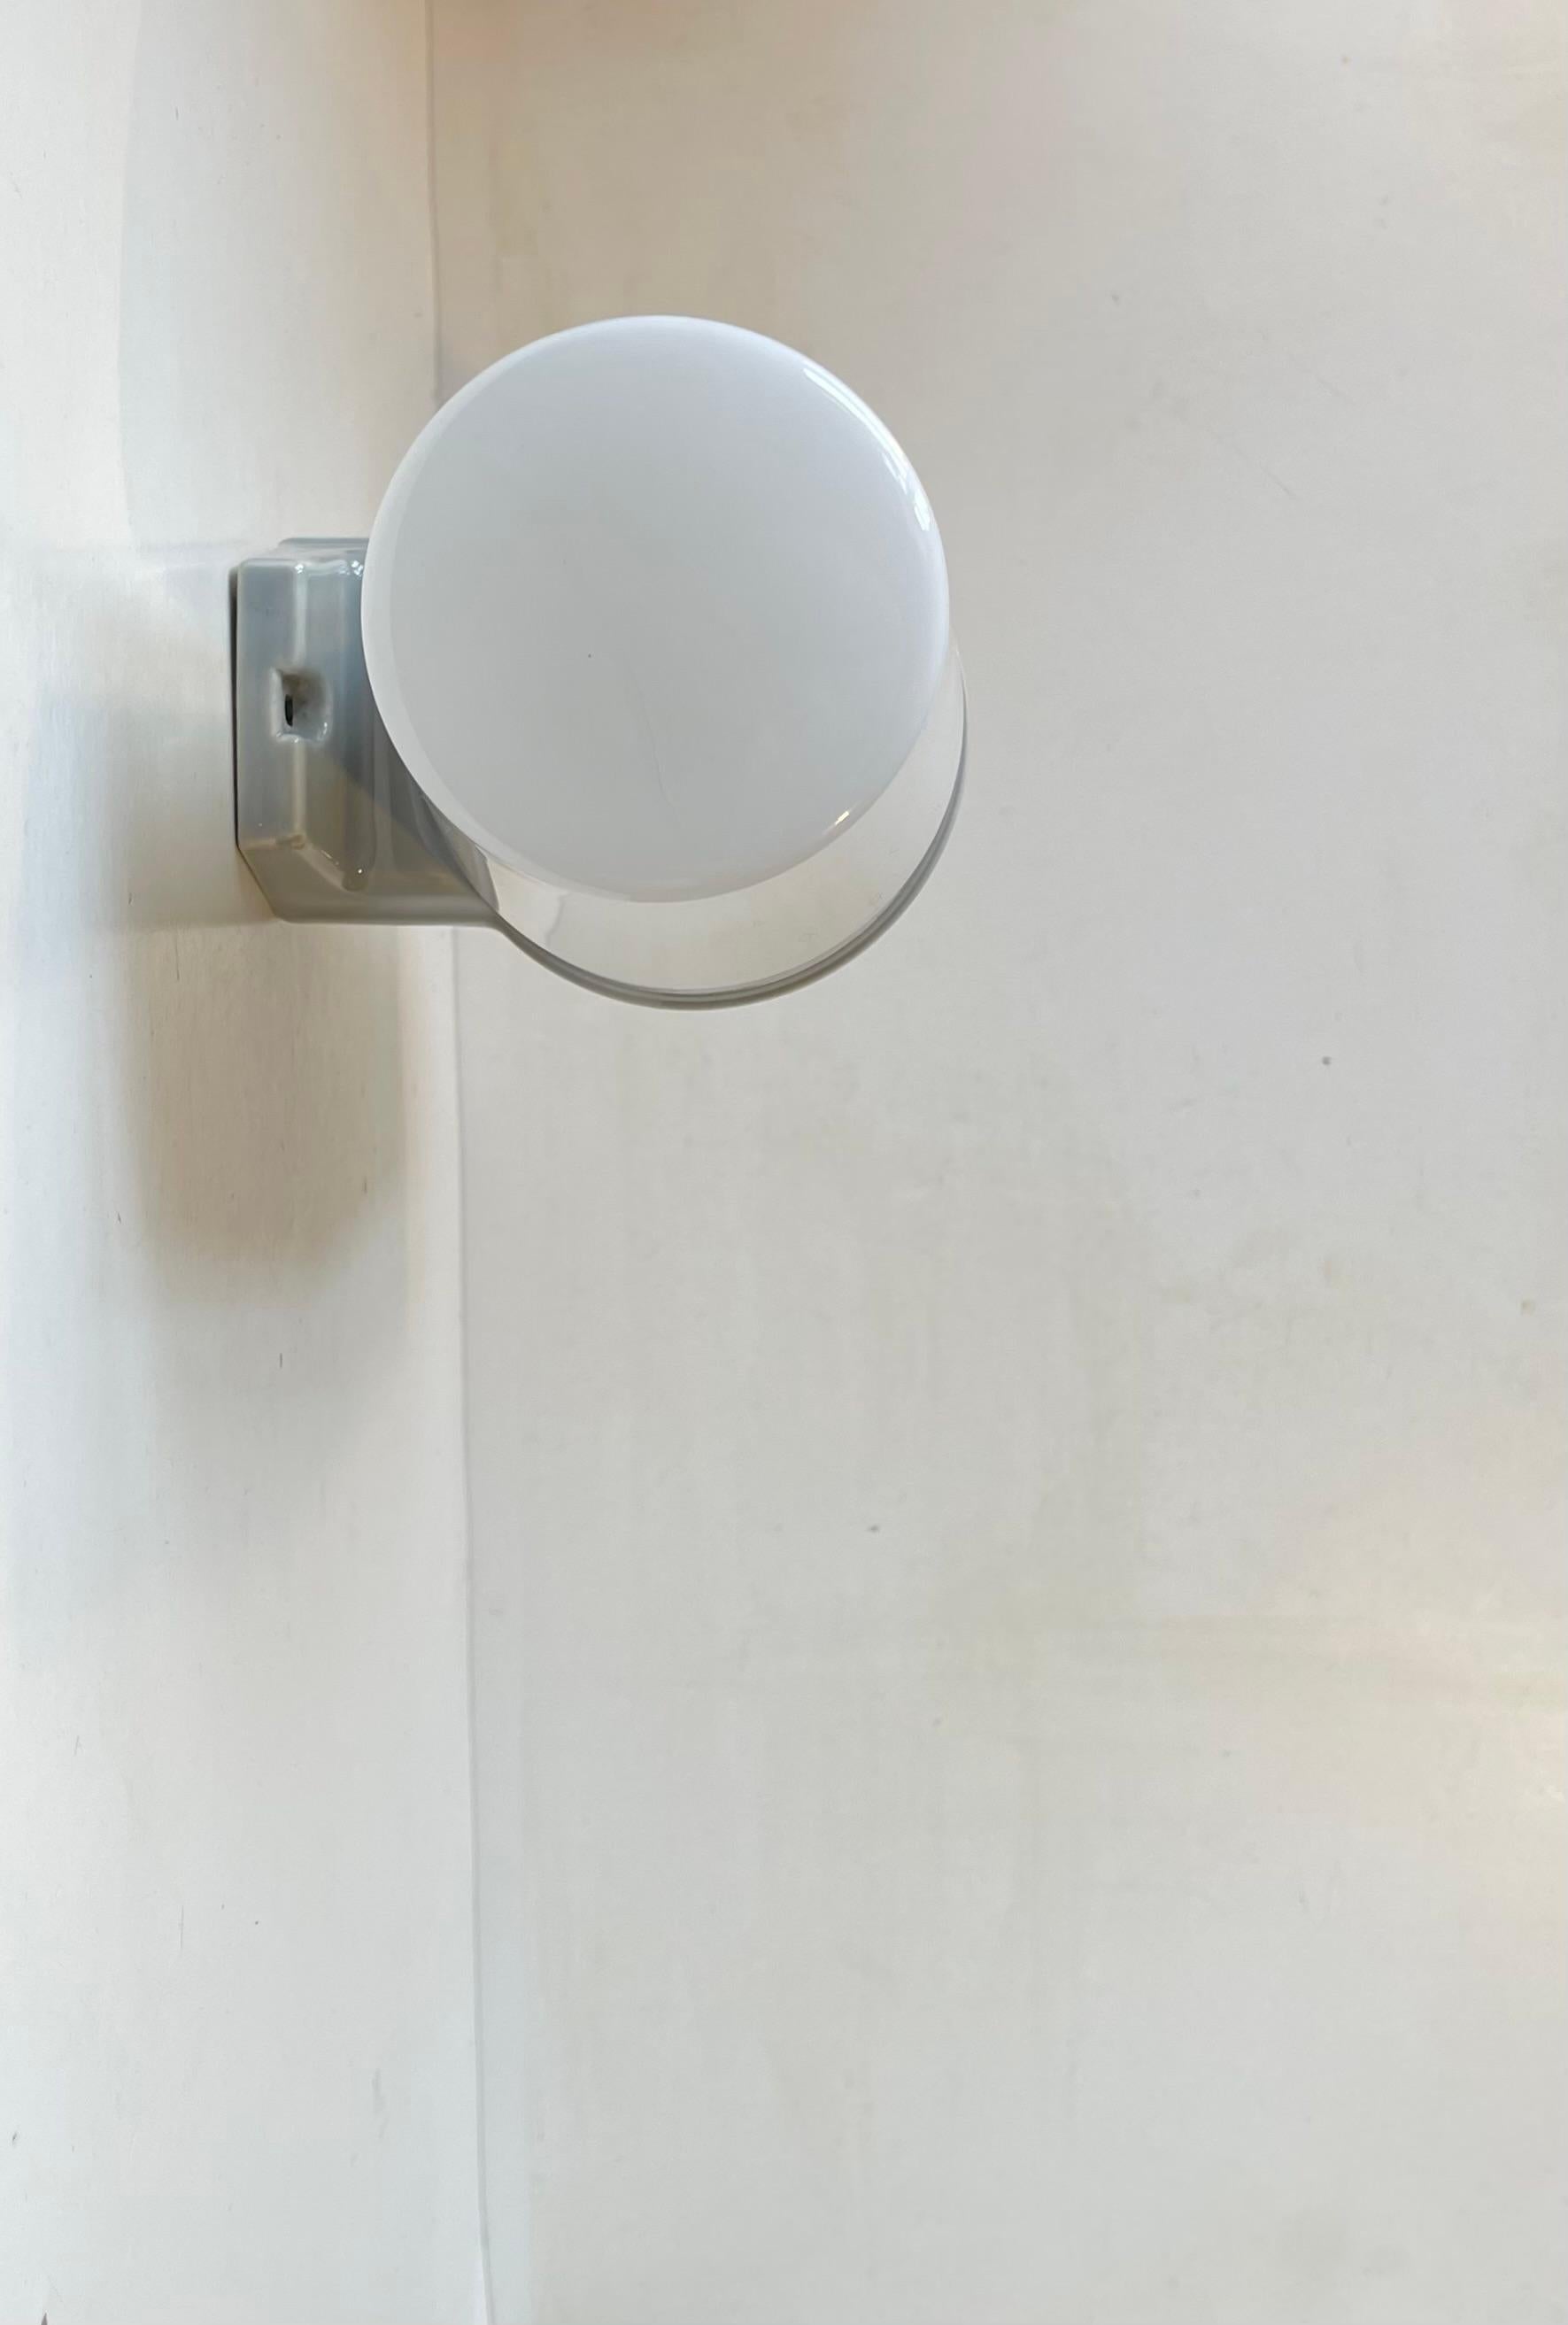 Large dual Wall sconce suitable as bathroom or outdoor lighting. Designed by Prince Sigvard Bernadotte for the swedish company Ifö during the 1960s. Grey glazed porcelain mount with 2 white opaline glass shades. 2 way mount - vertical or horizontal